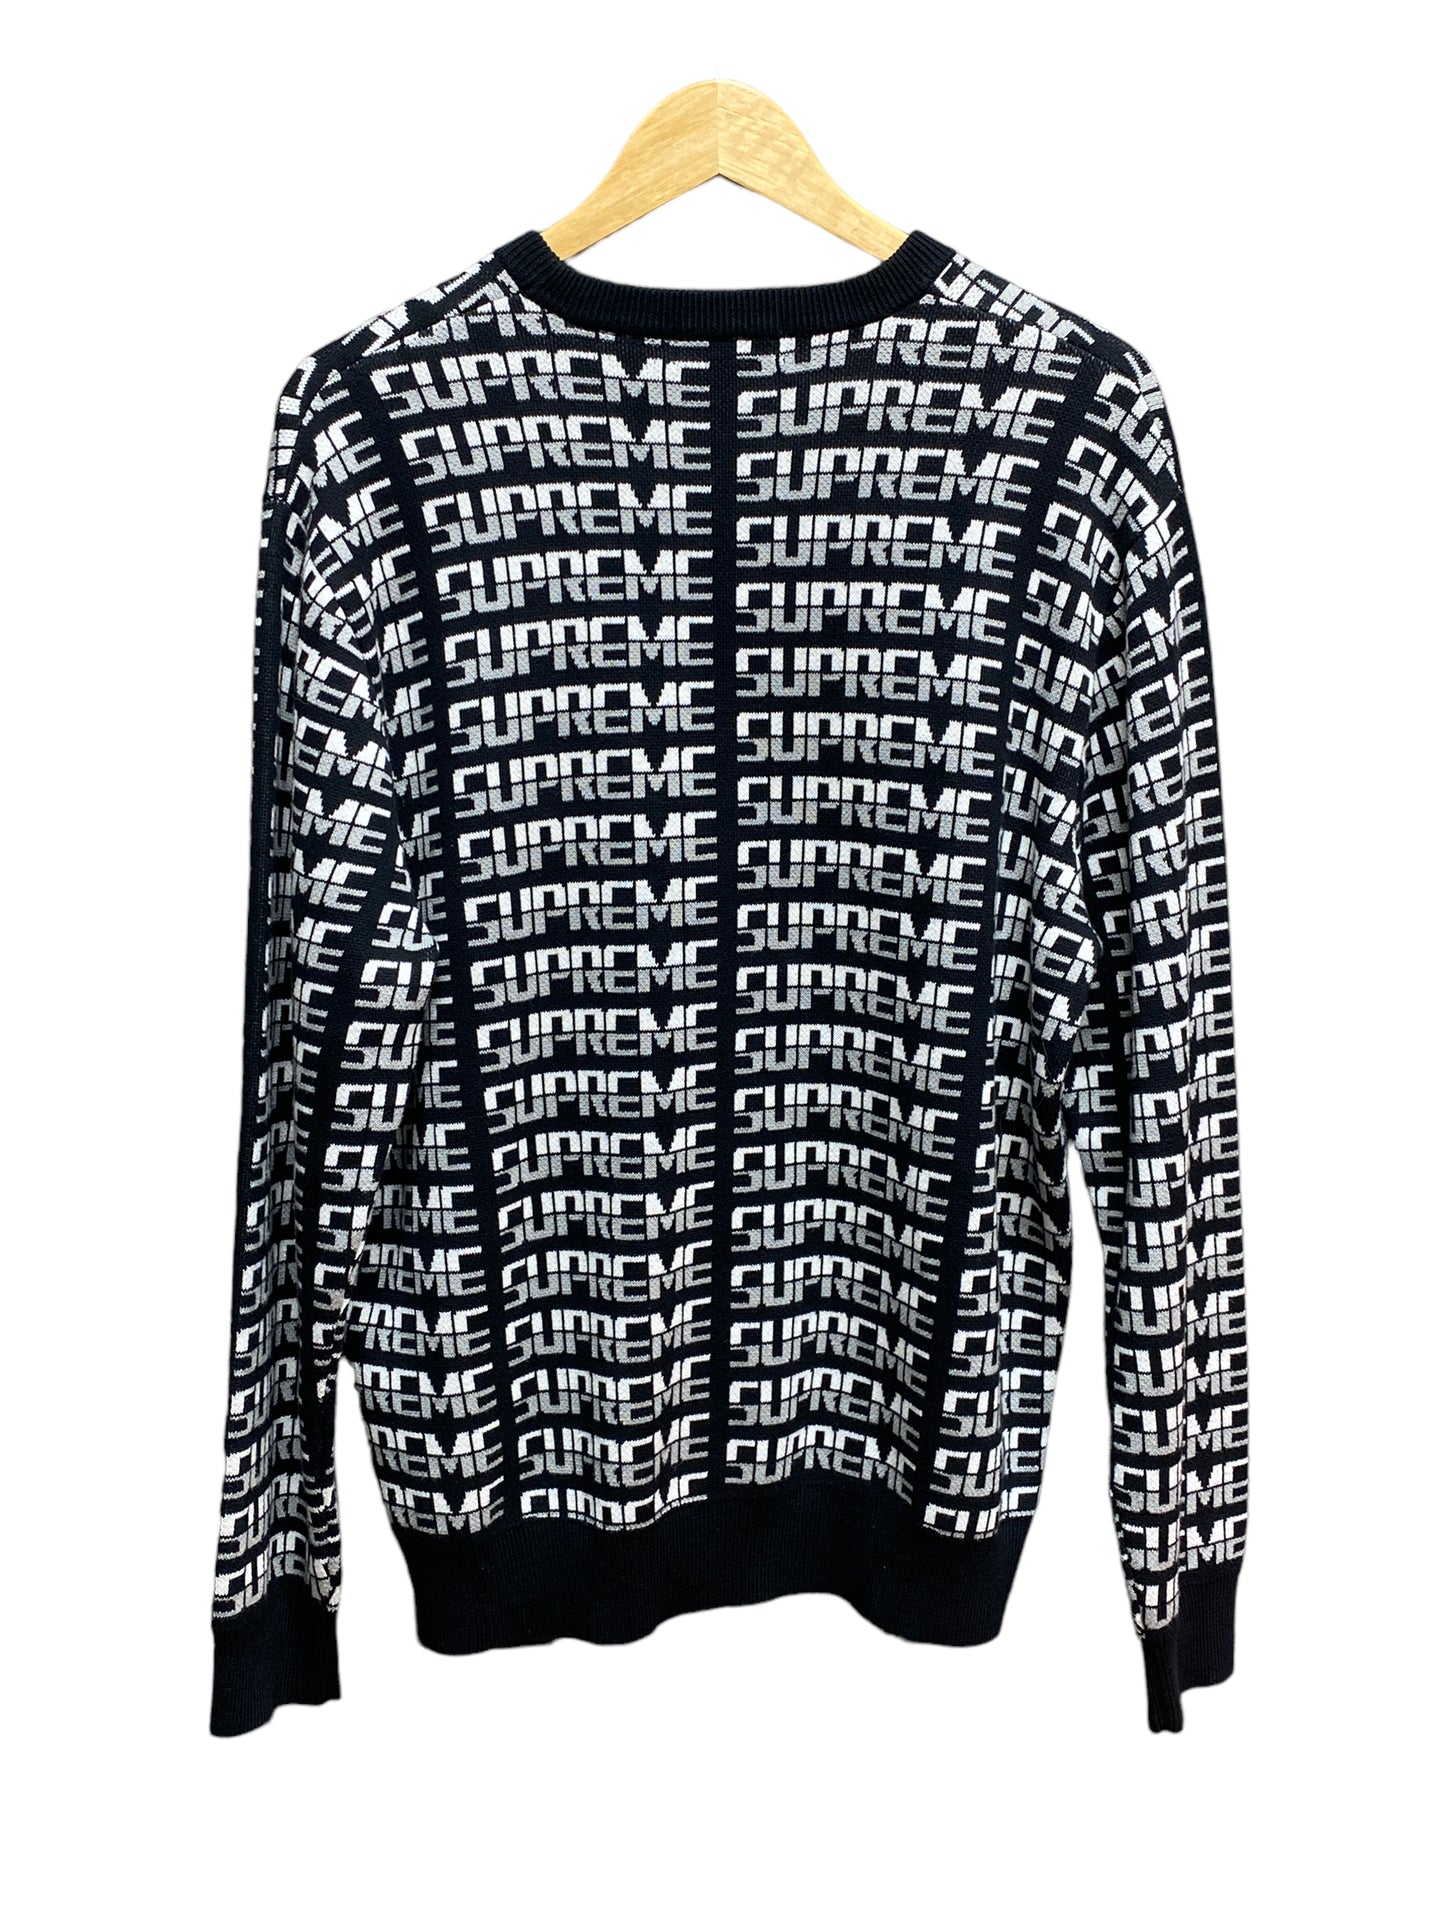 Supreme Black All Over Print Knit Sweater FW17 Size Large